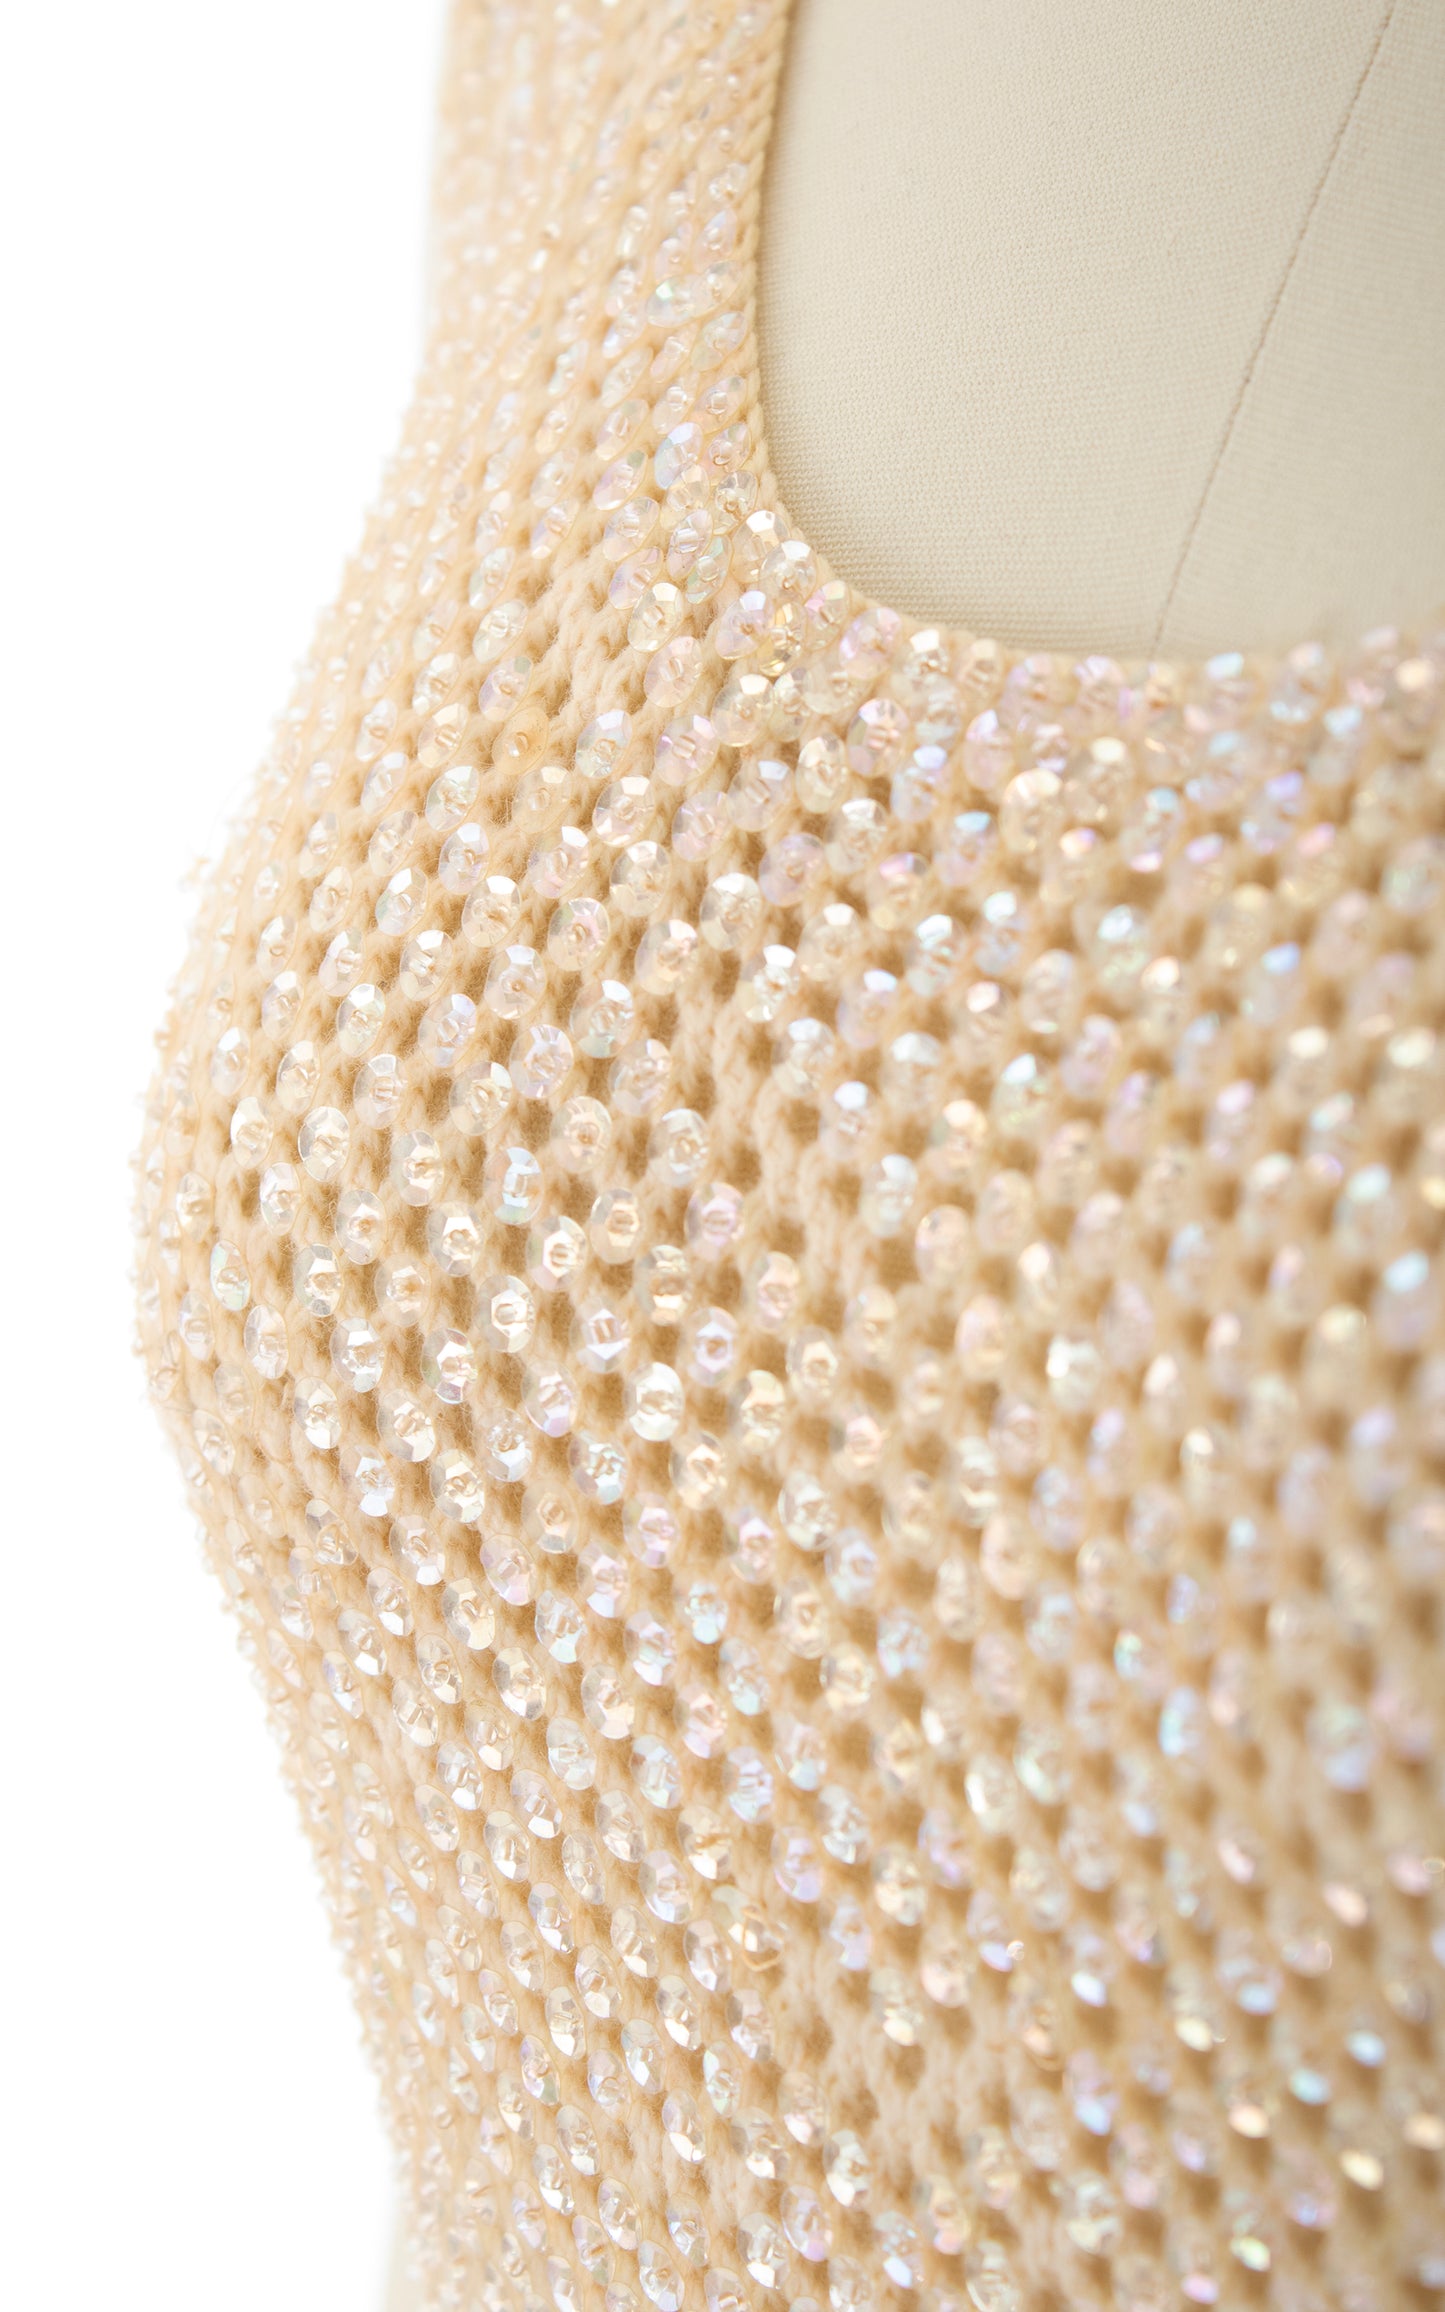 NEW ARRIVAL || 1950s Sequin Beaded Knit Wool Sweater Dress | x-small/small